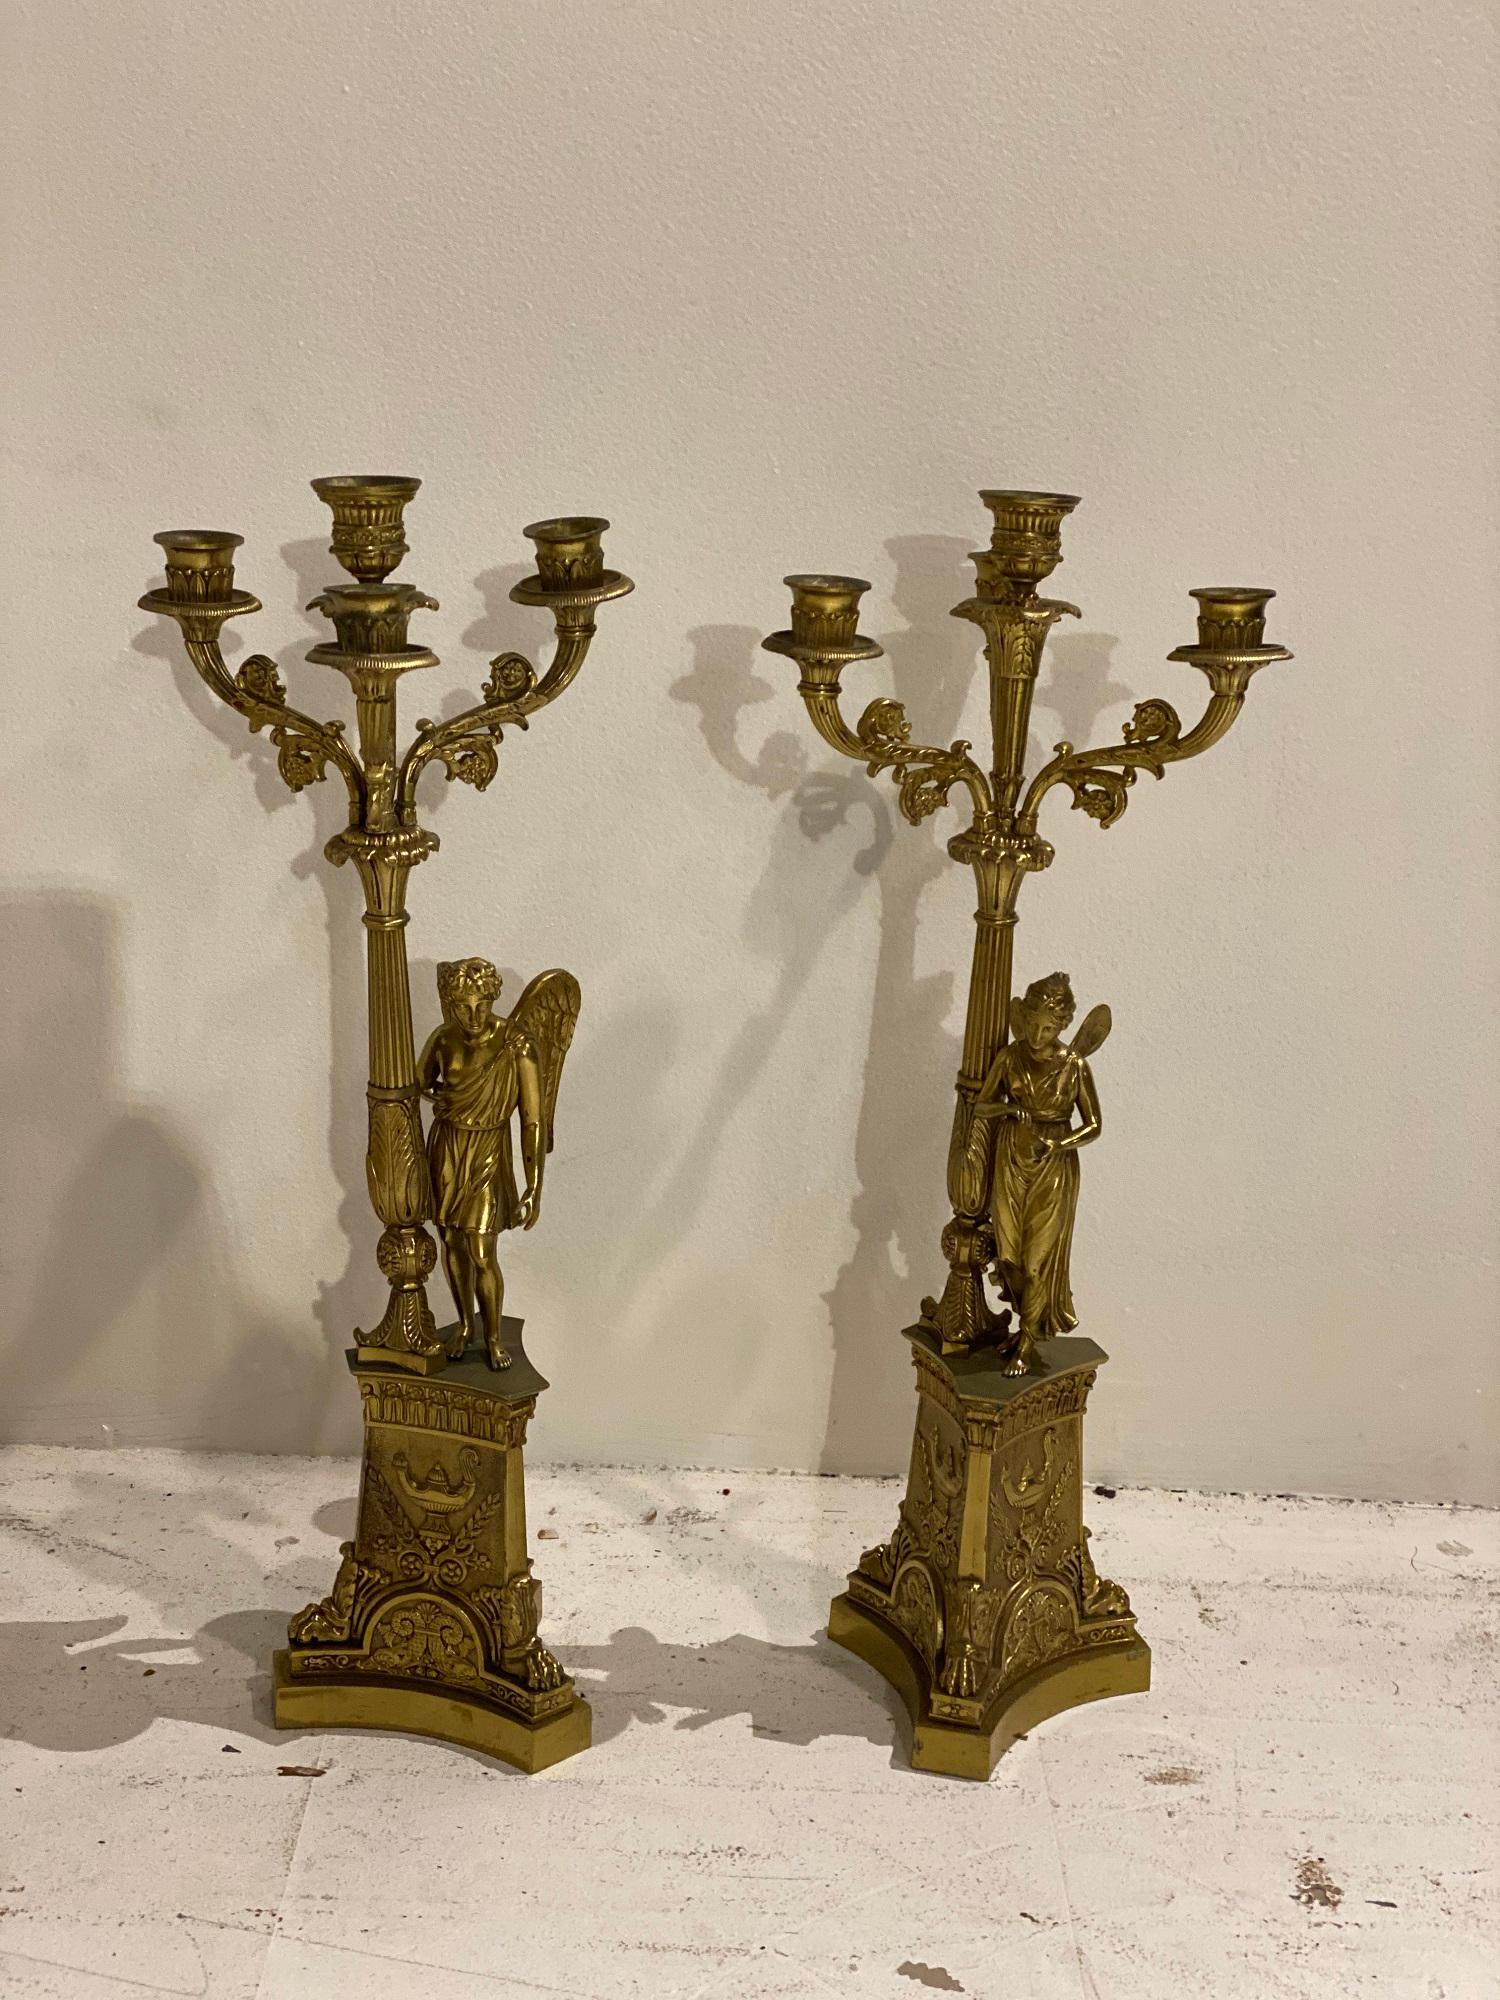 A pair of late 19th century French empire candlesticks with three lights converted into table lamps